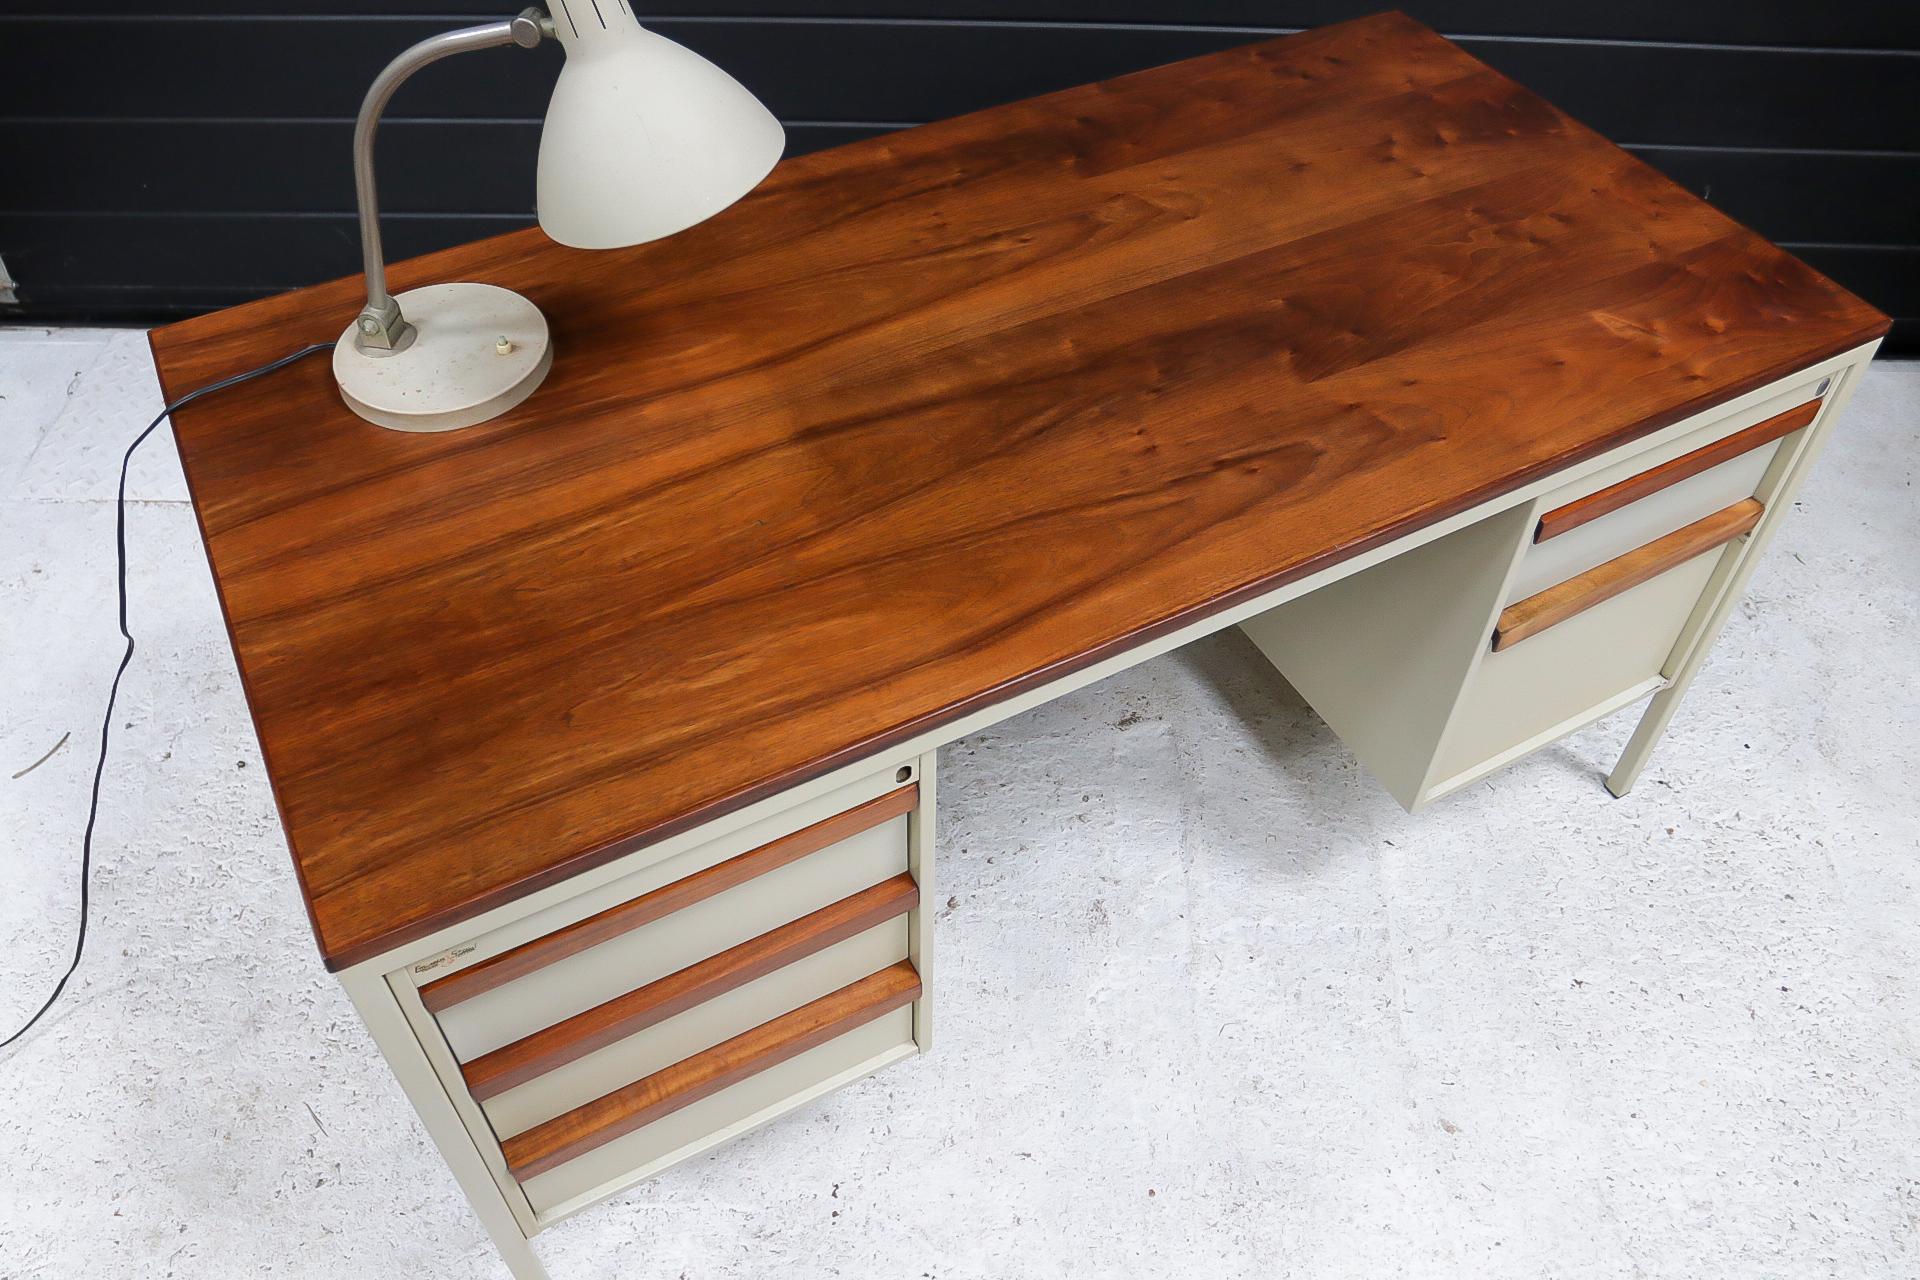 Mid-century Coen de Vries industrial metal desk with double stacked drawers.
Beautiful table top, made of a walnut wood type, with matching drawer handles.
The metal frame is coated in a gray color.
The desk dates from around the 1960’s, the desk